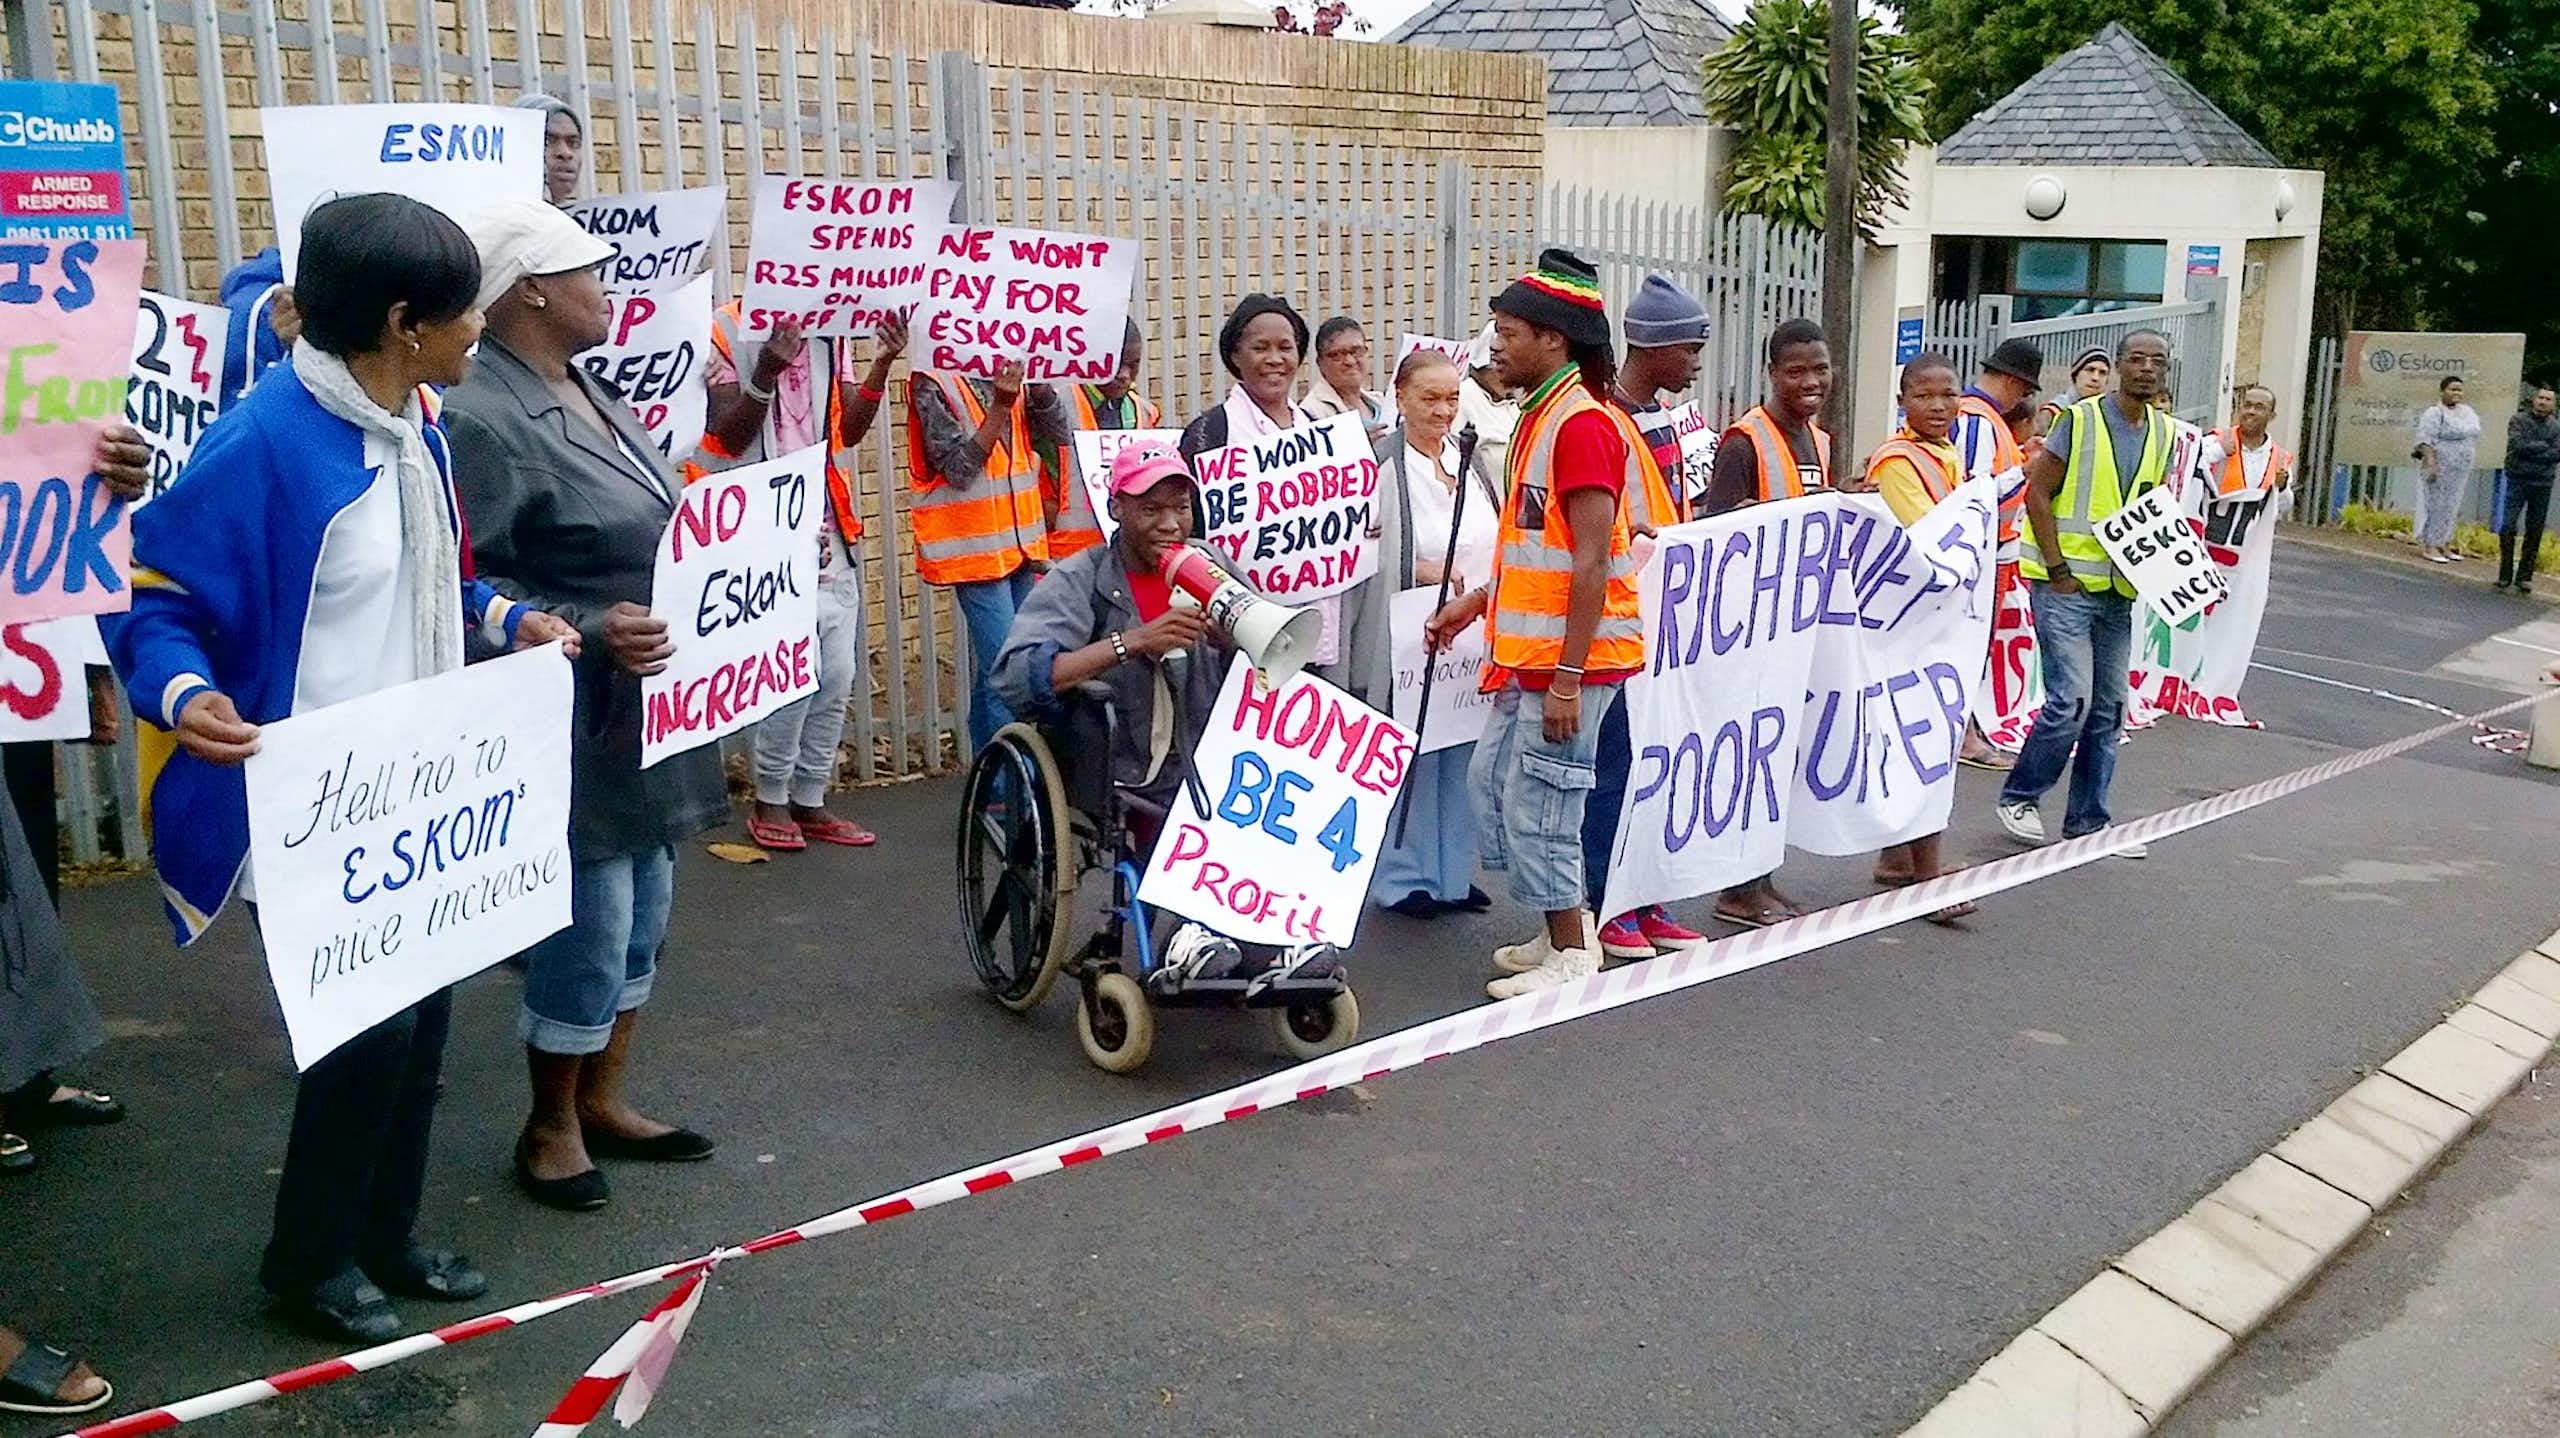 A group of people standing in a street (one in a wheelchair with a megaphone) behind barrier tape and holding placards.